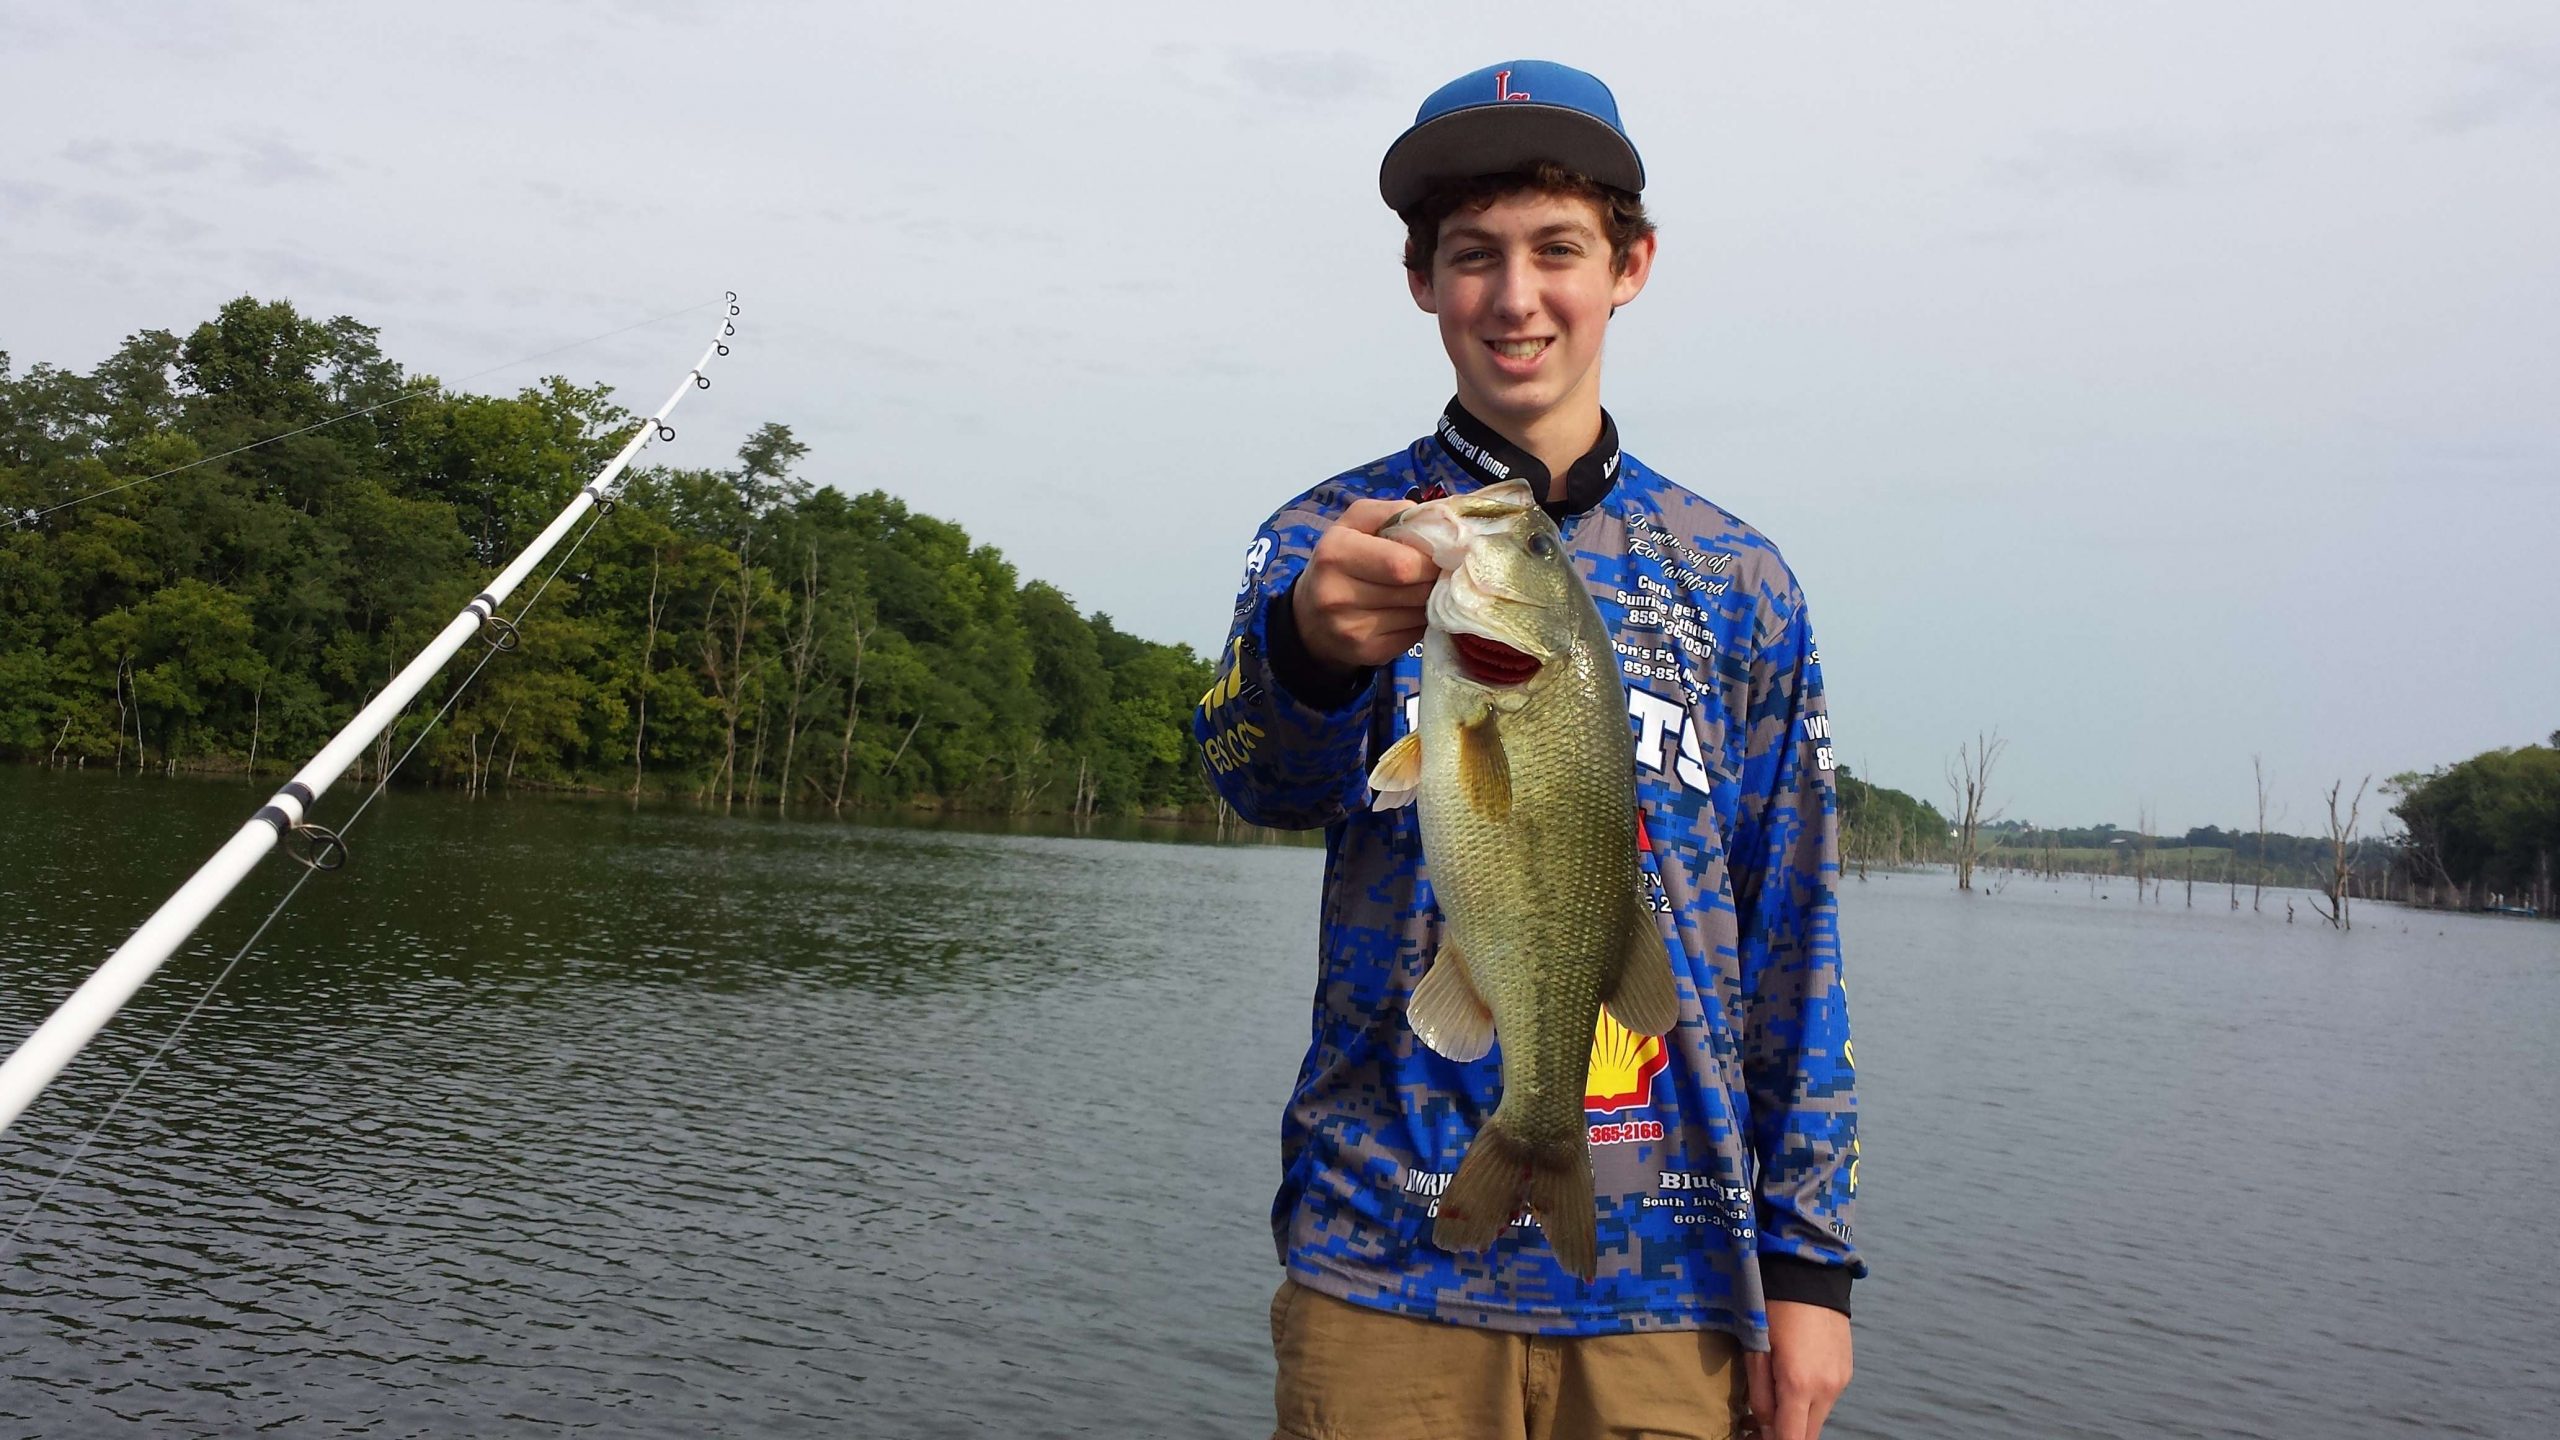 <b>Kentucky: Mason Moore</b><br>
Moore of Waynesburg, Ky., fished a total of 13 tournaments in 2015 and placed in the Top 5 in 11 of those; while claiming 4 victories. His success has been the result of numerous hours on the water and having all of needed equipment prepared before tournament day. During Mason's 8th grade year, he was one of the first middle school student athletes to qualify for the KHSAA State Championship.
